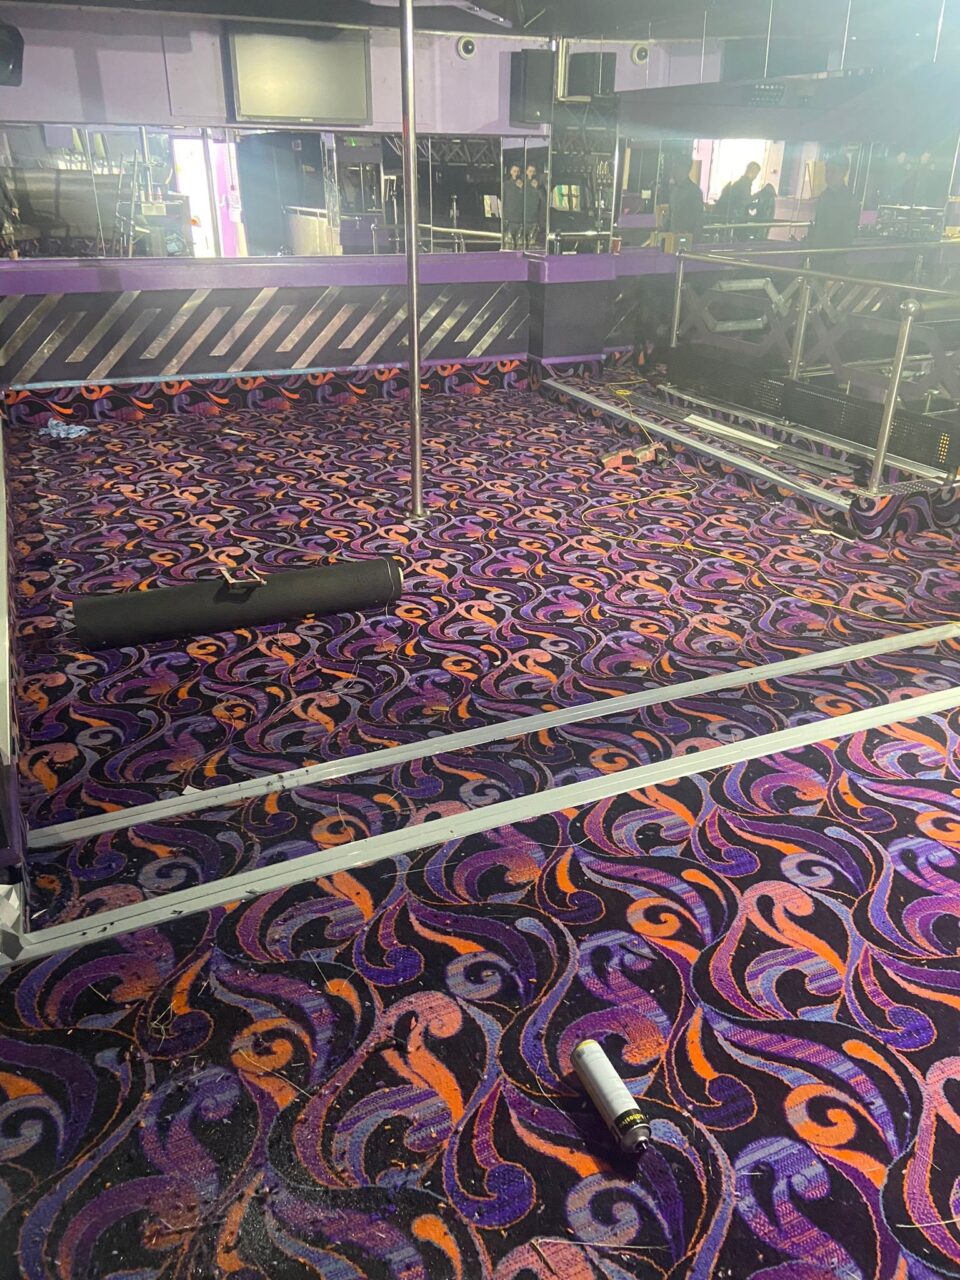 Acapulco Nightclub Halifax pole dancing area with bespoke purple and black patterned carpets designed by Wilton Carpets